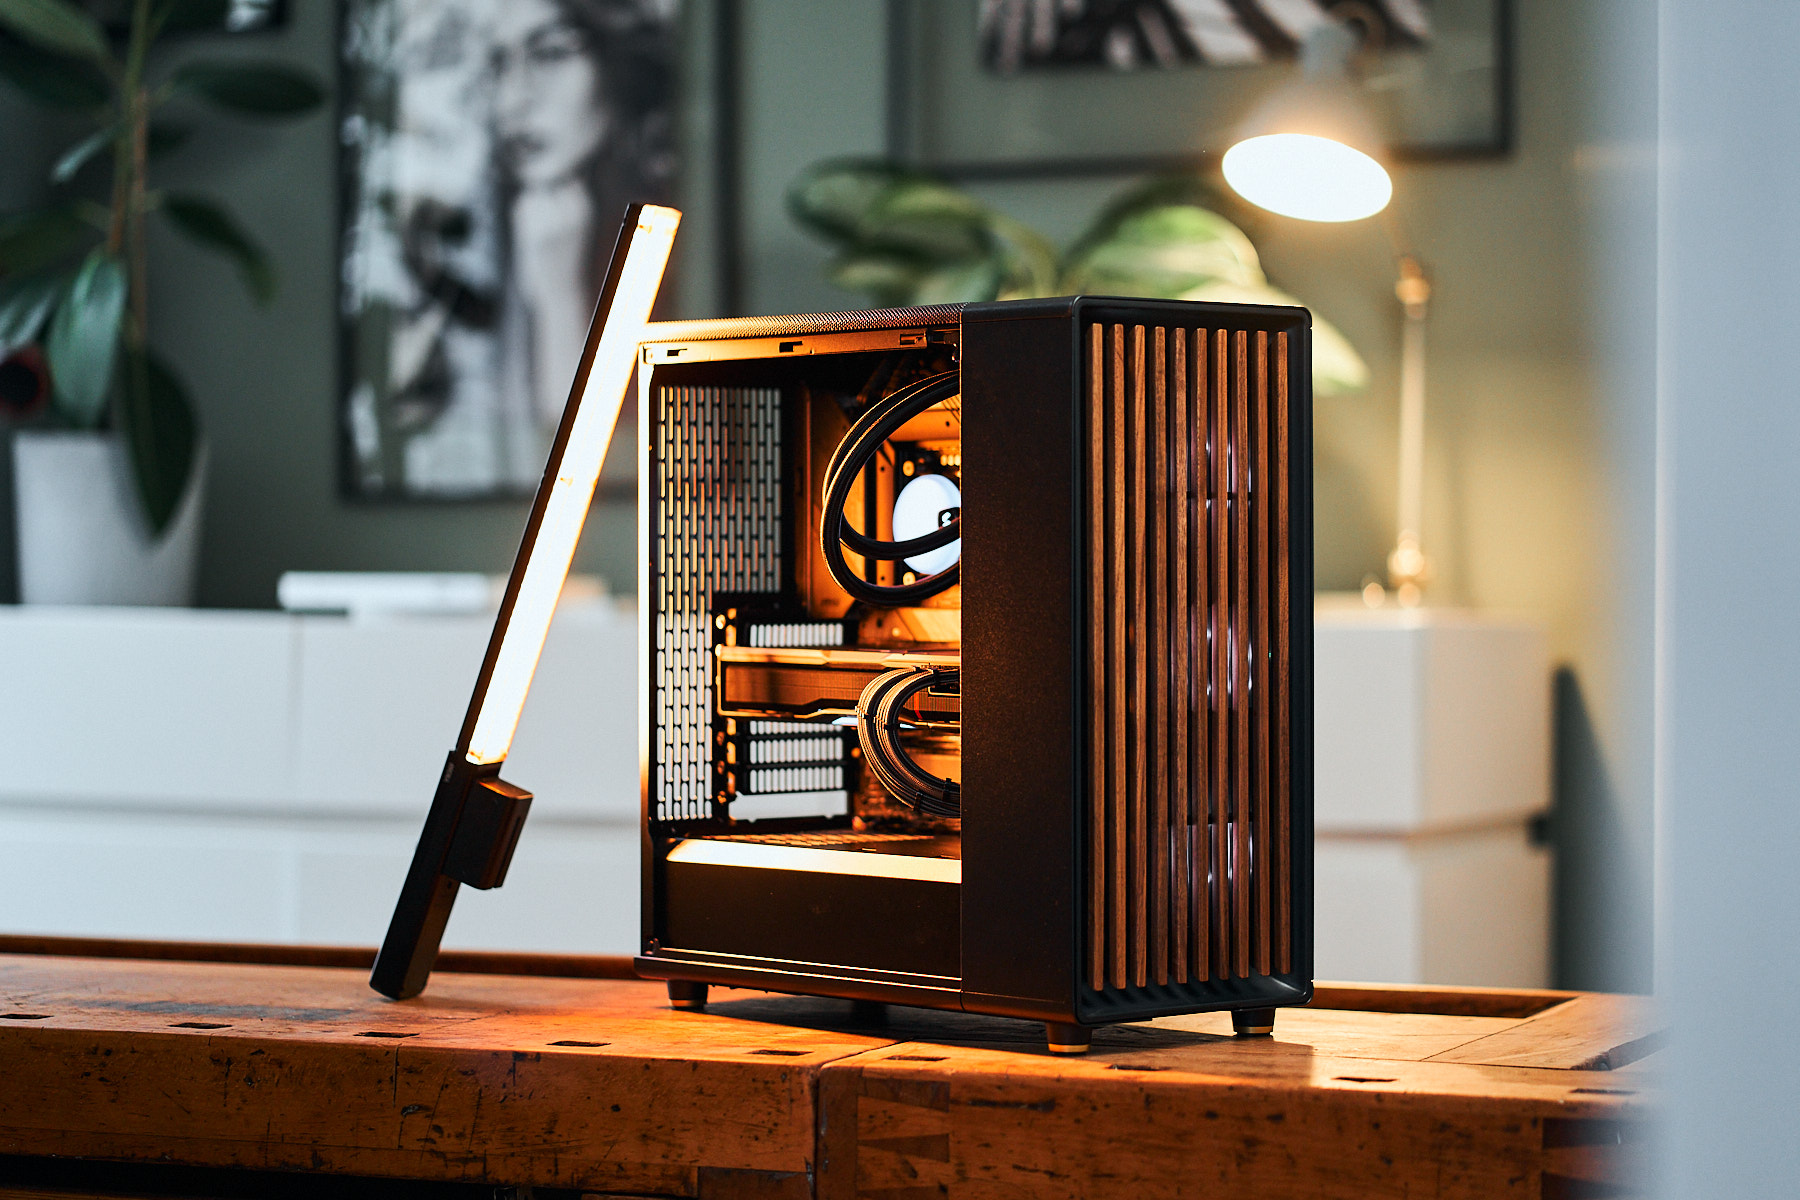 Fractal Design North hands-on: The PC case with 